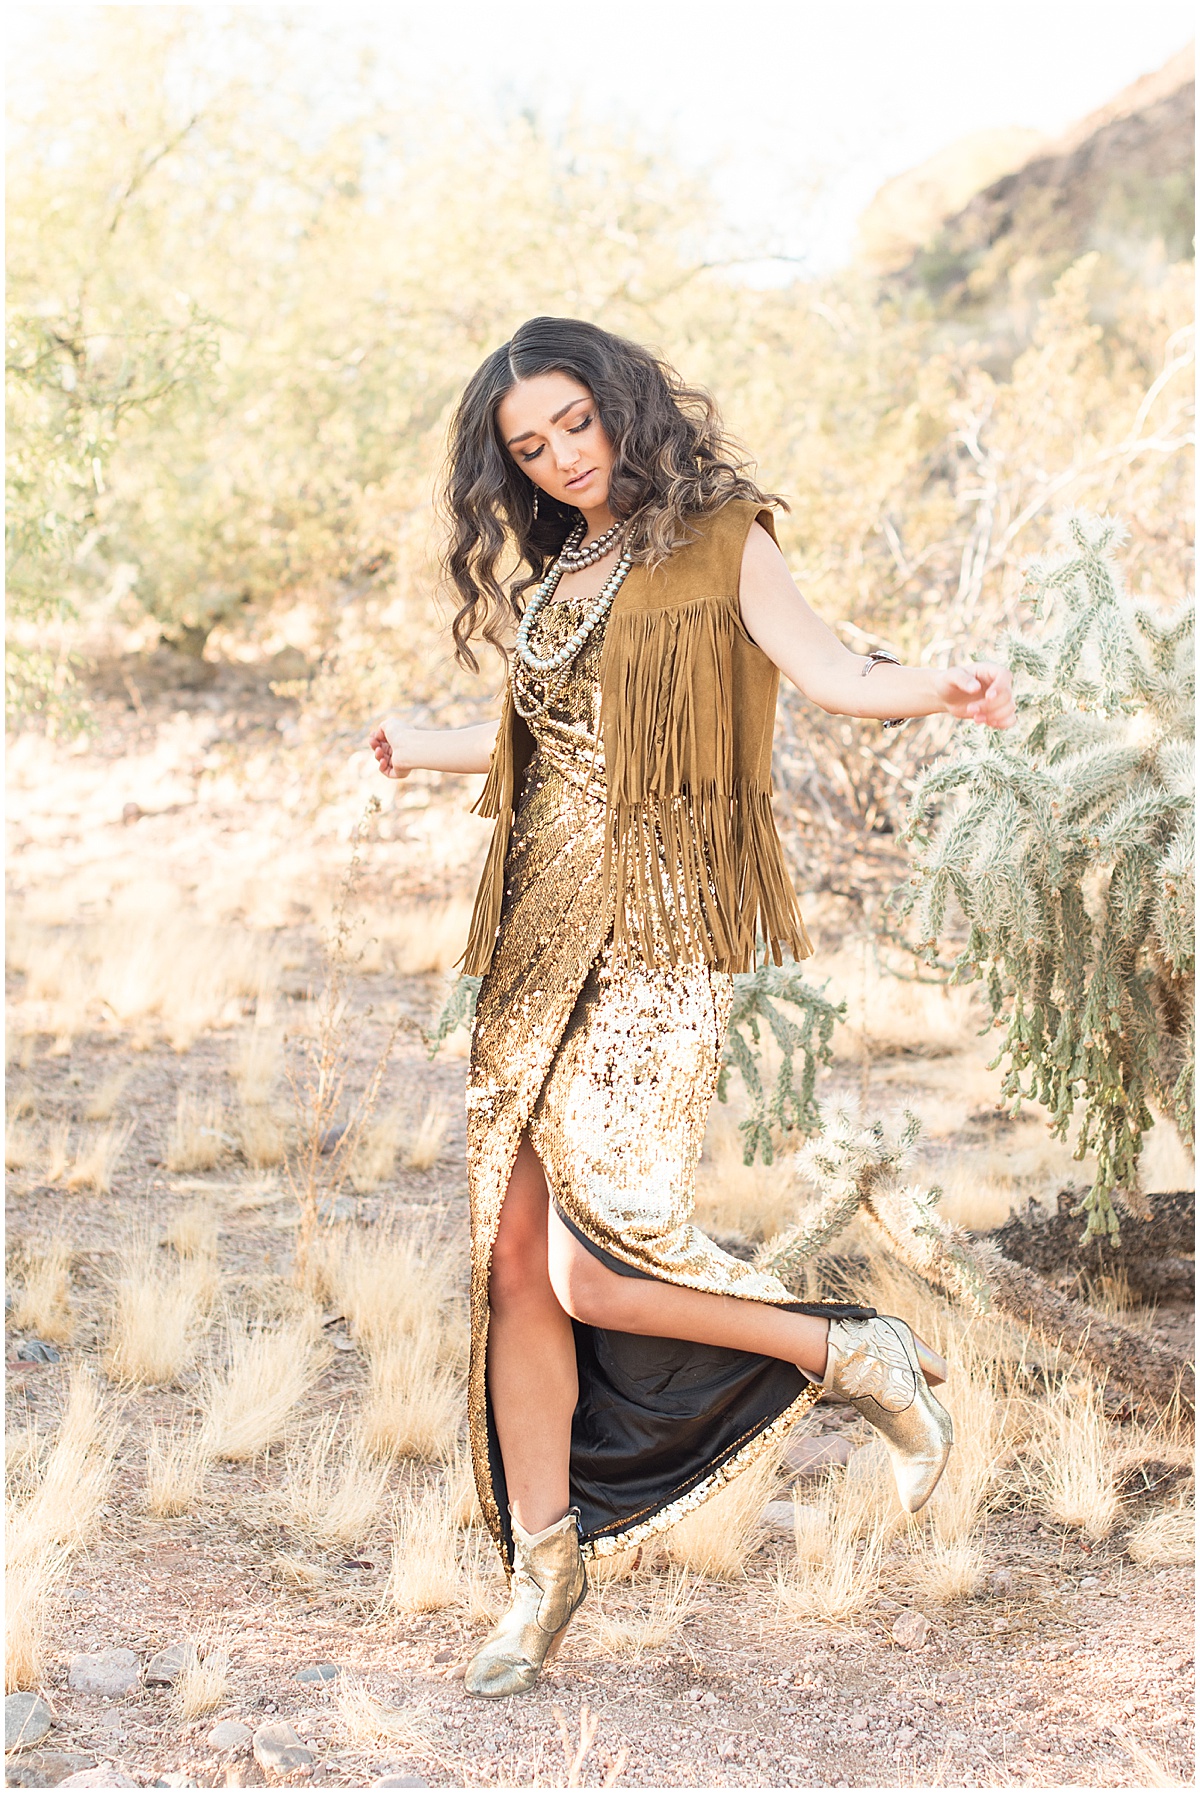 Desert styled shoot at Showit United organized by Christianne Taylor